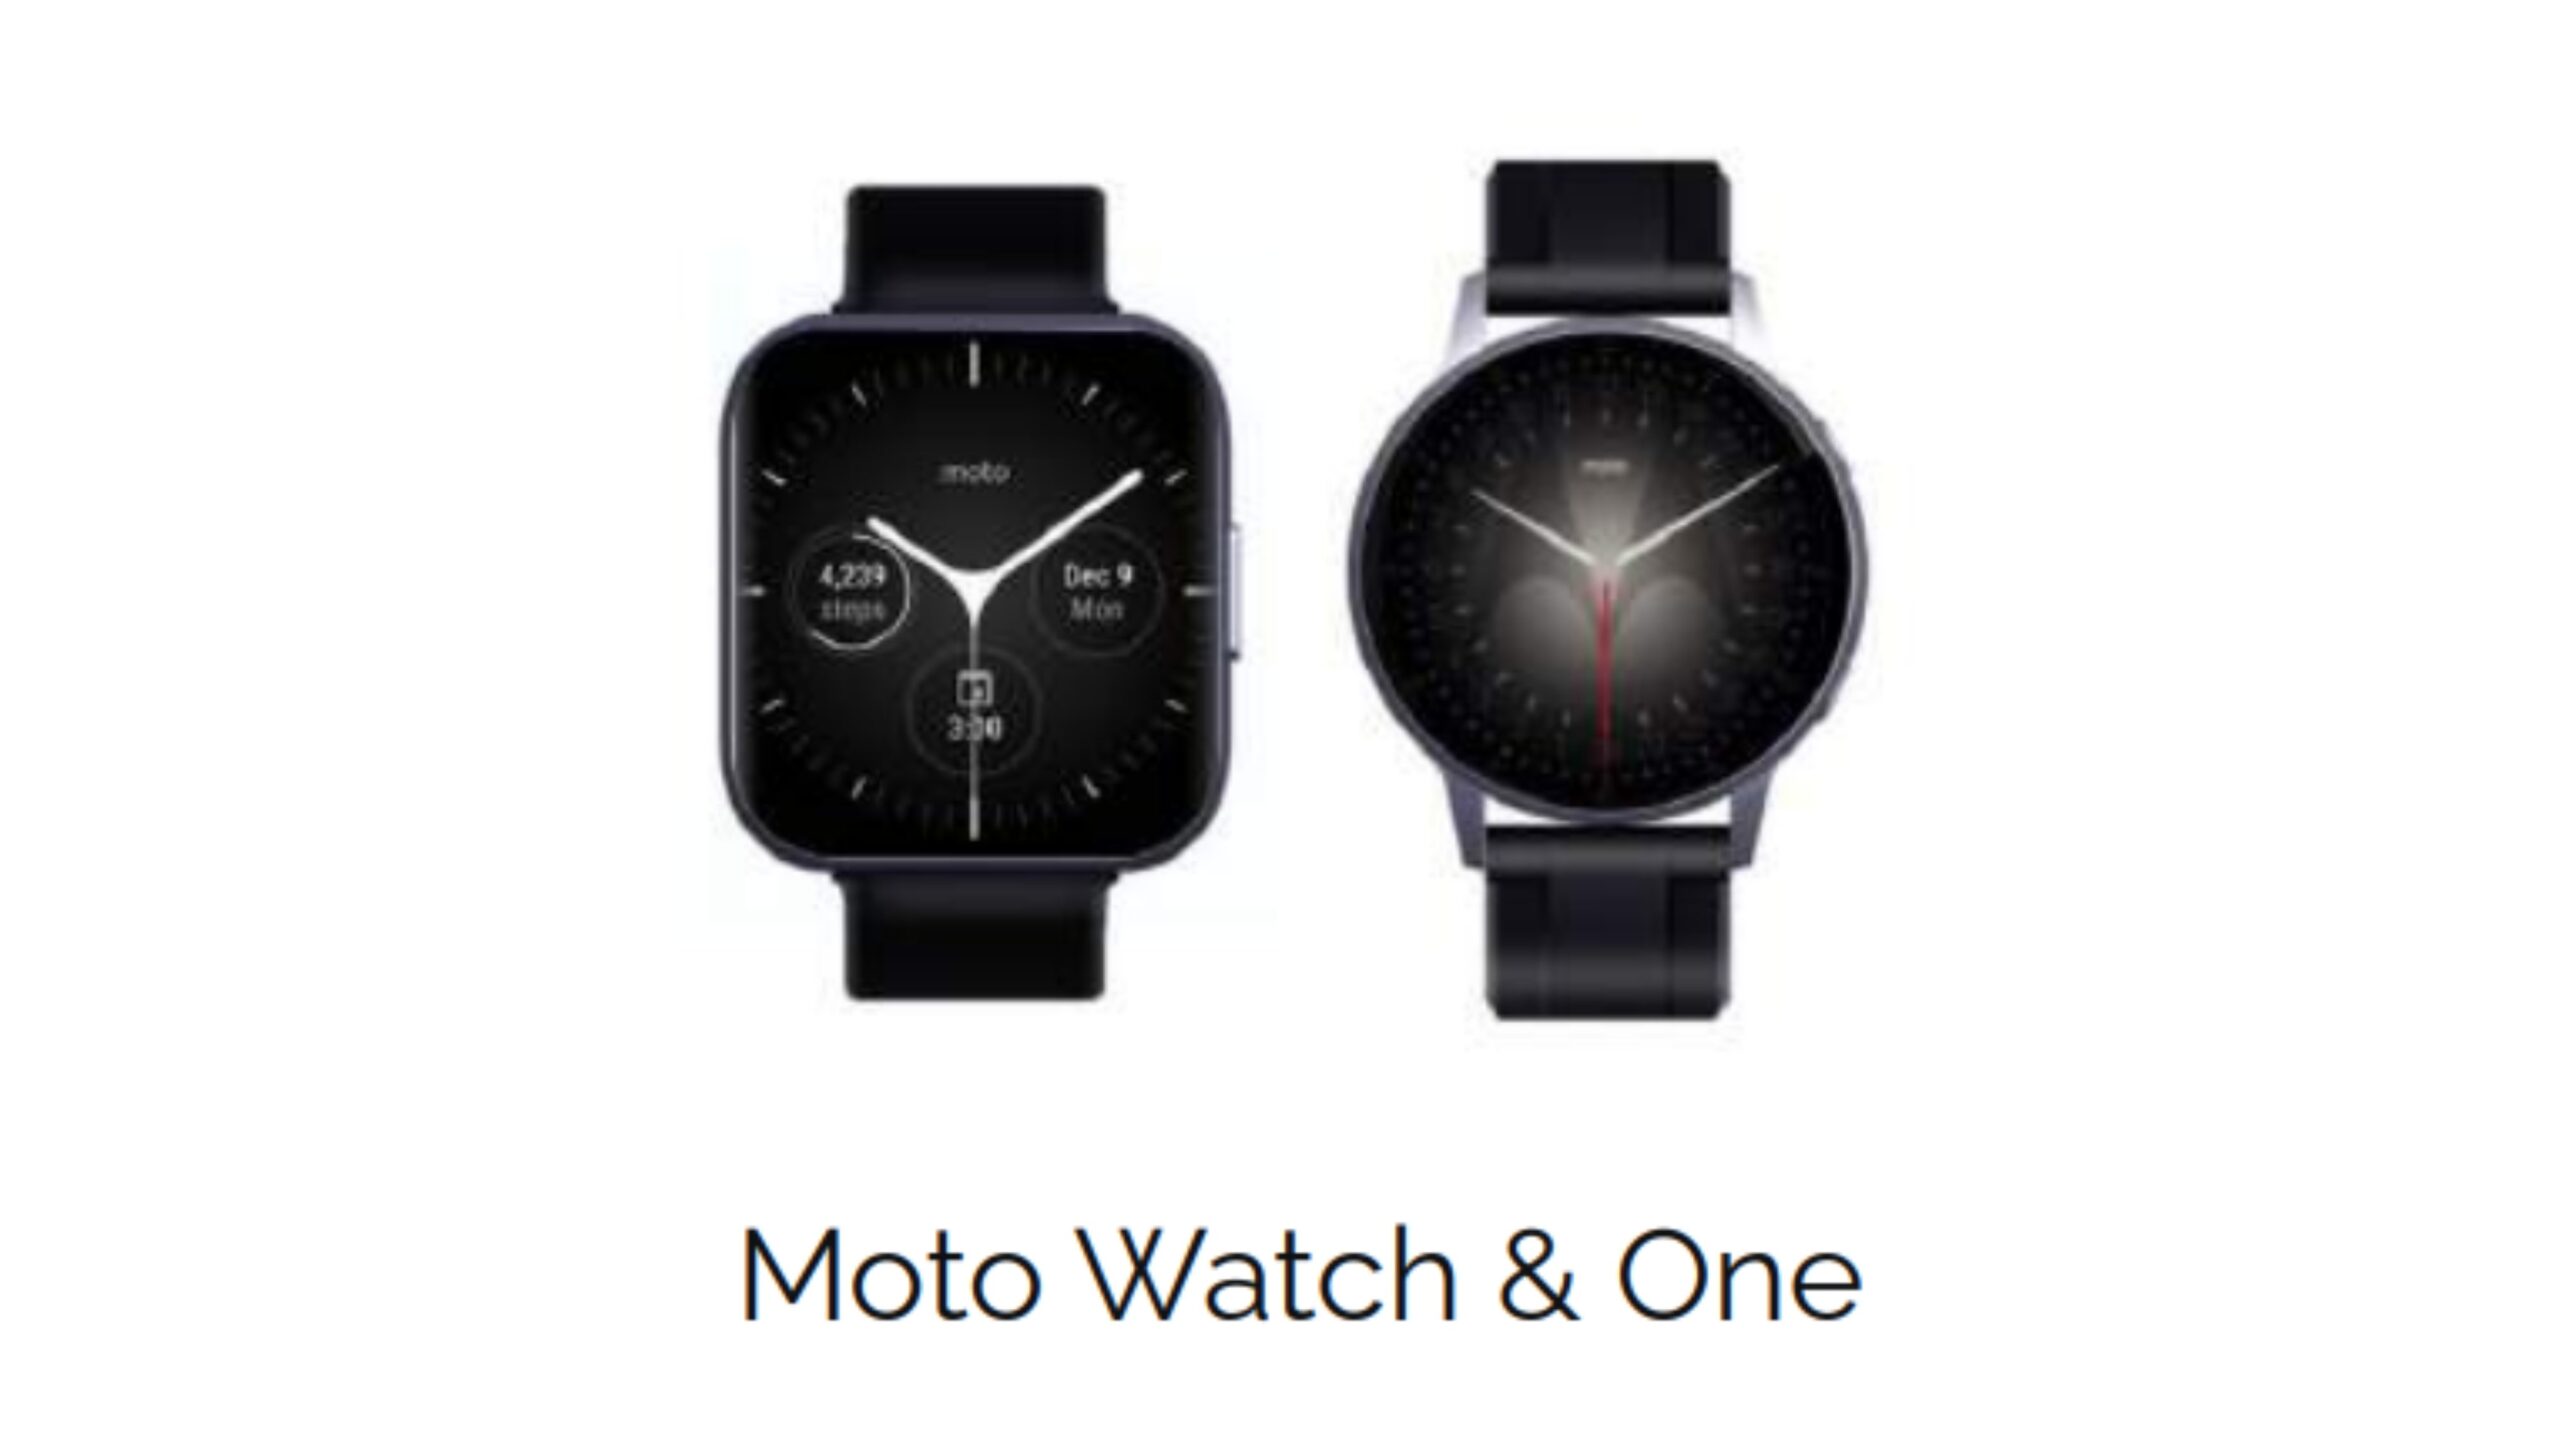 eBuyNow’s Moto Watch One smartwatch will have a Snapdragon Wear 4100 chip